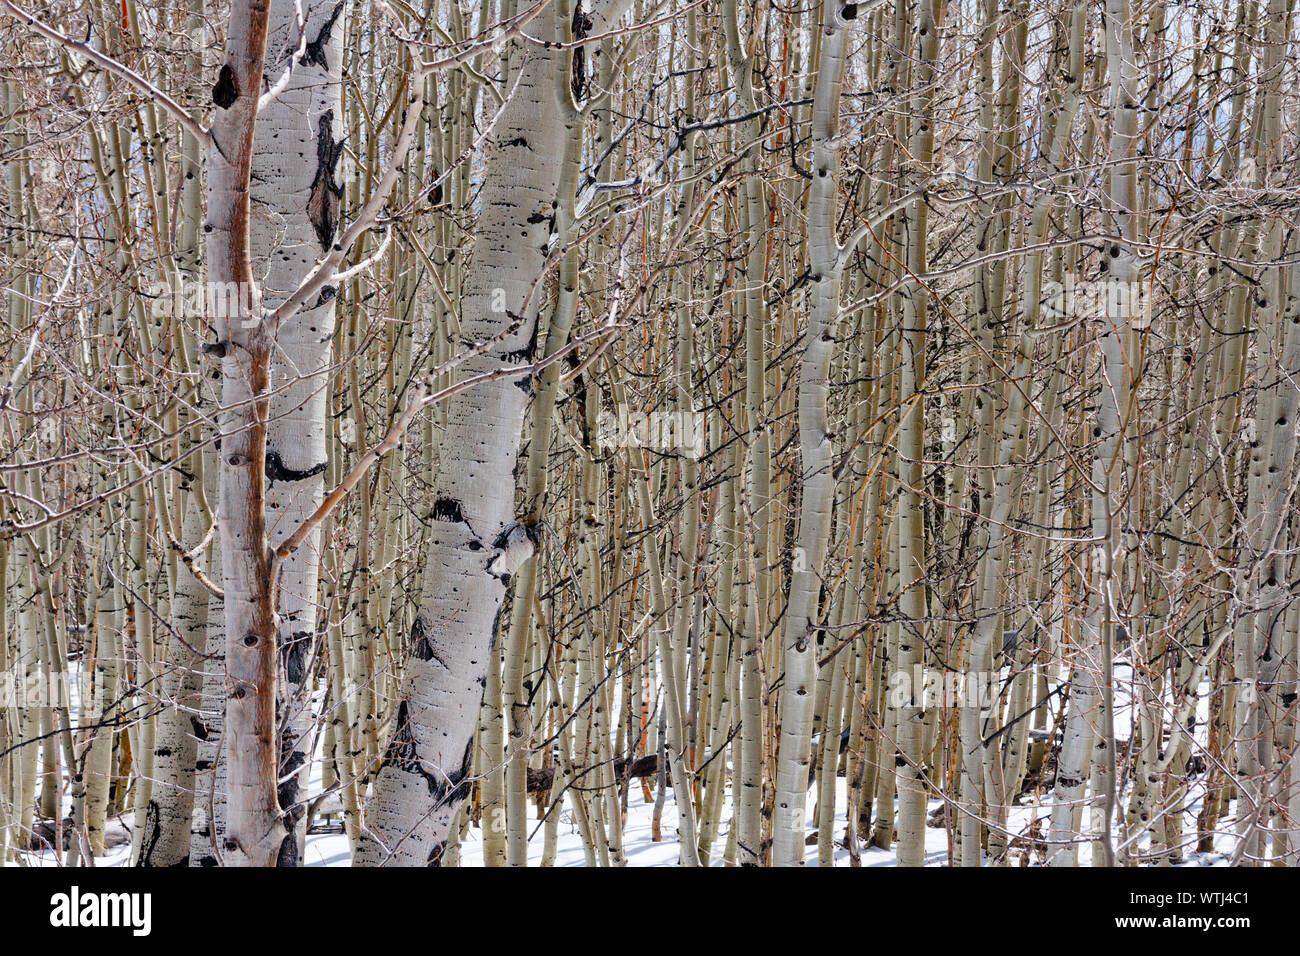 Winter view of a forest with countless birches (Betula papyrifera). Image can be used to illustrate the saying 'Can't see the wood for the trees'. Stock Photo